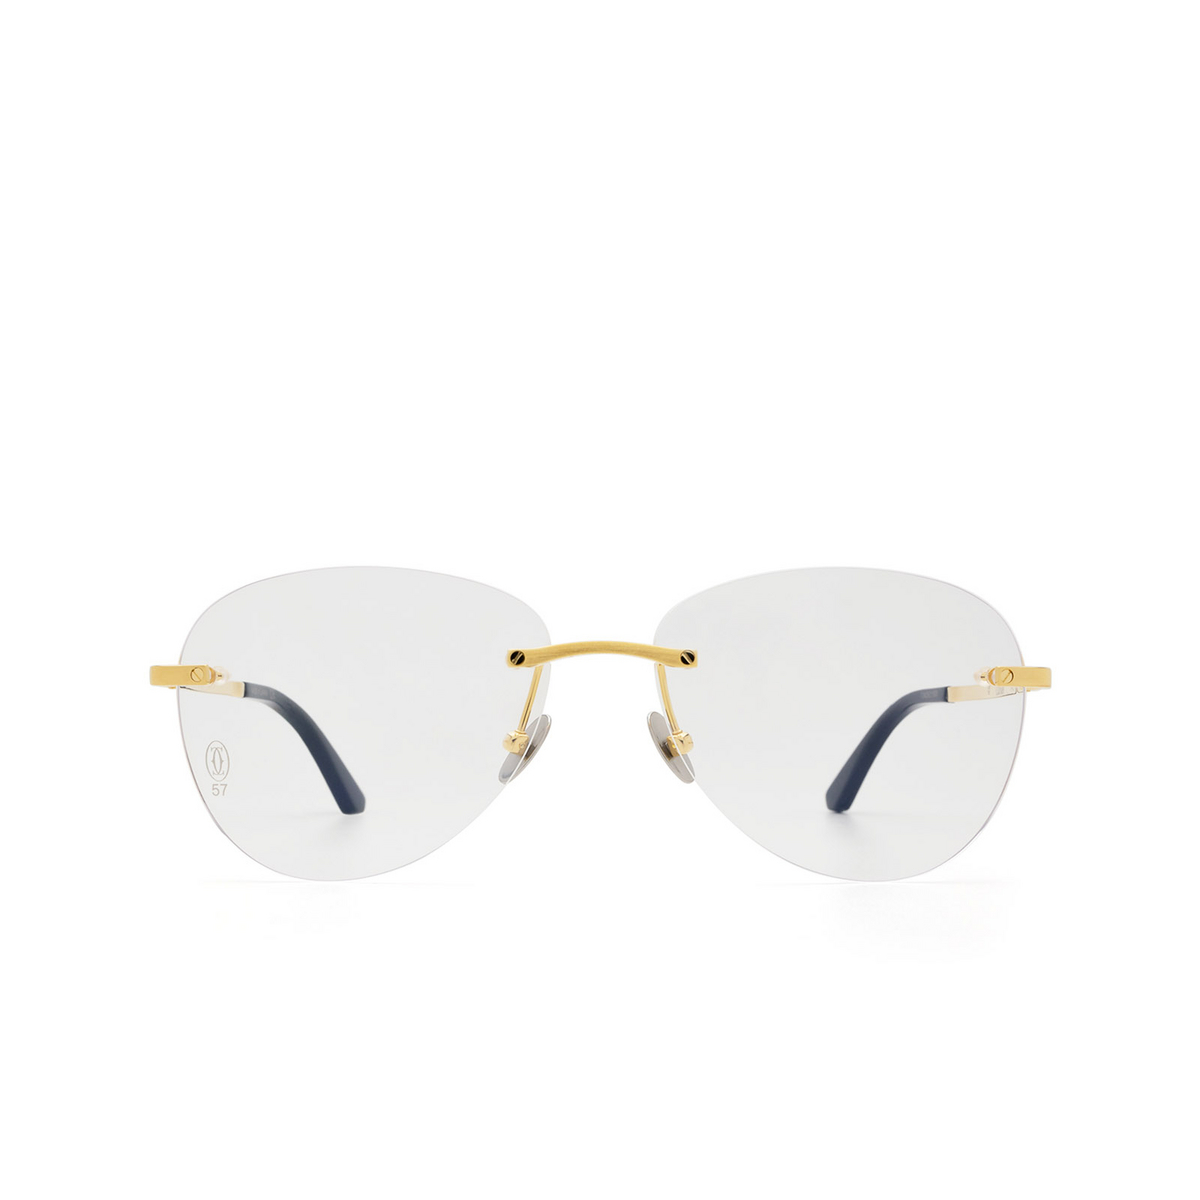 Cartier® Aviator Eyeglasses: CT0254O color 001 Gold - front view